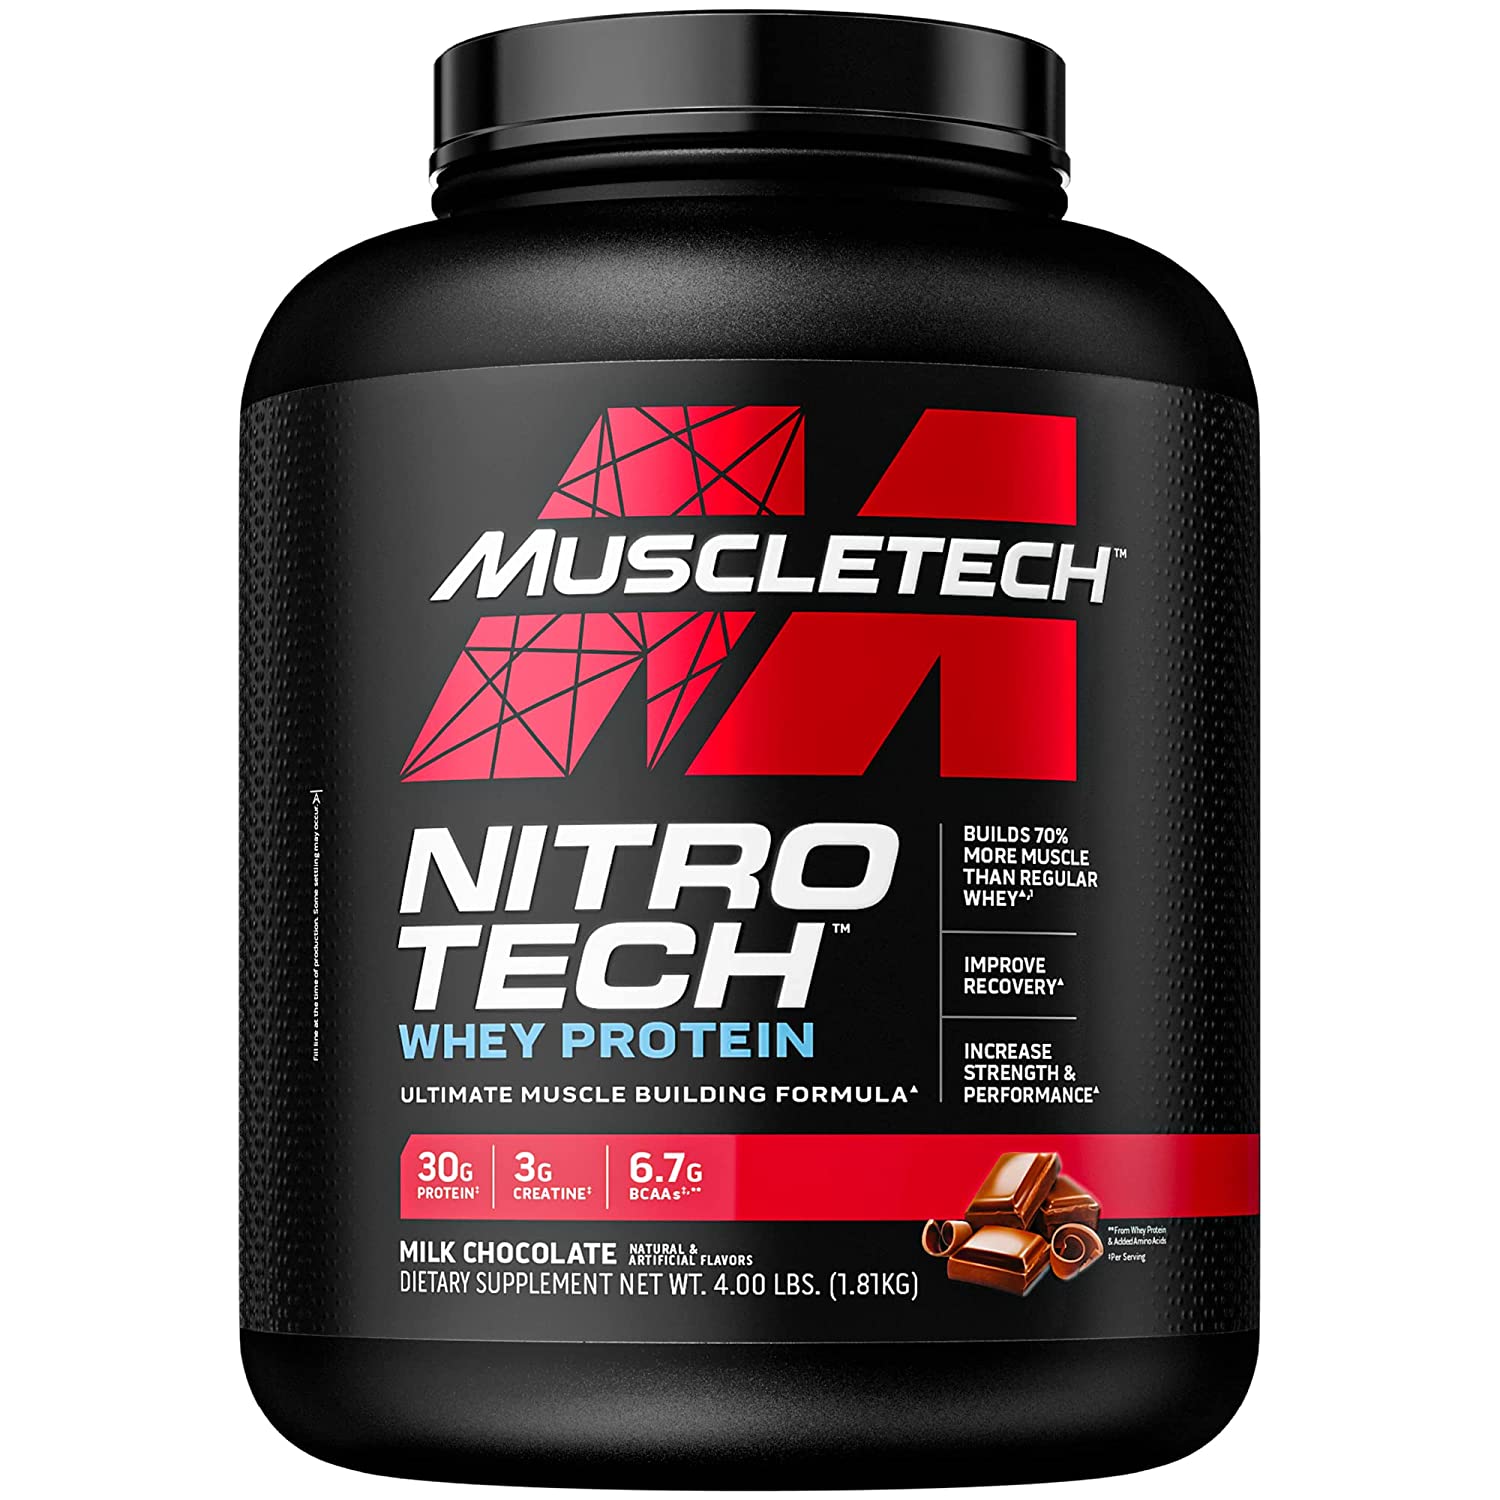 Muscletech NitroTech Performance Series Whey Protein+Creatine for Muscle Gain